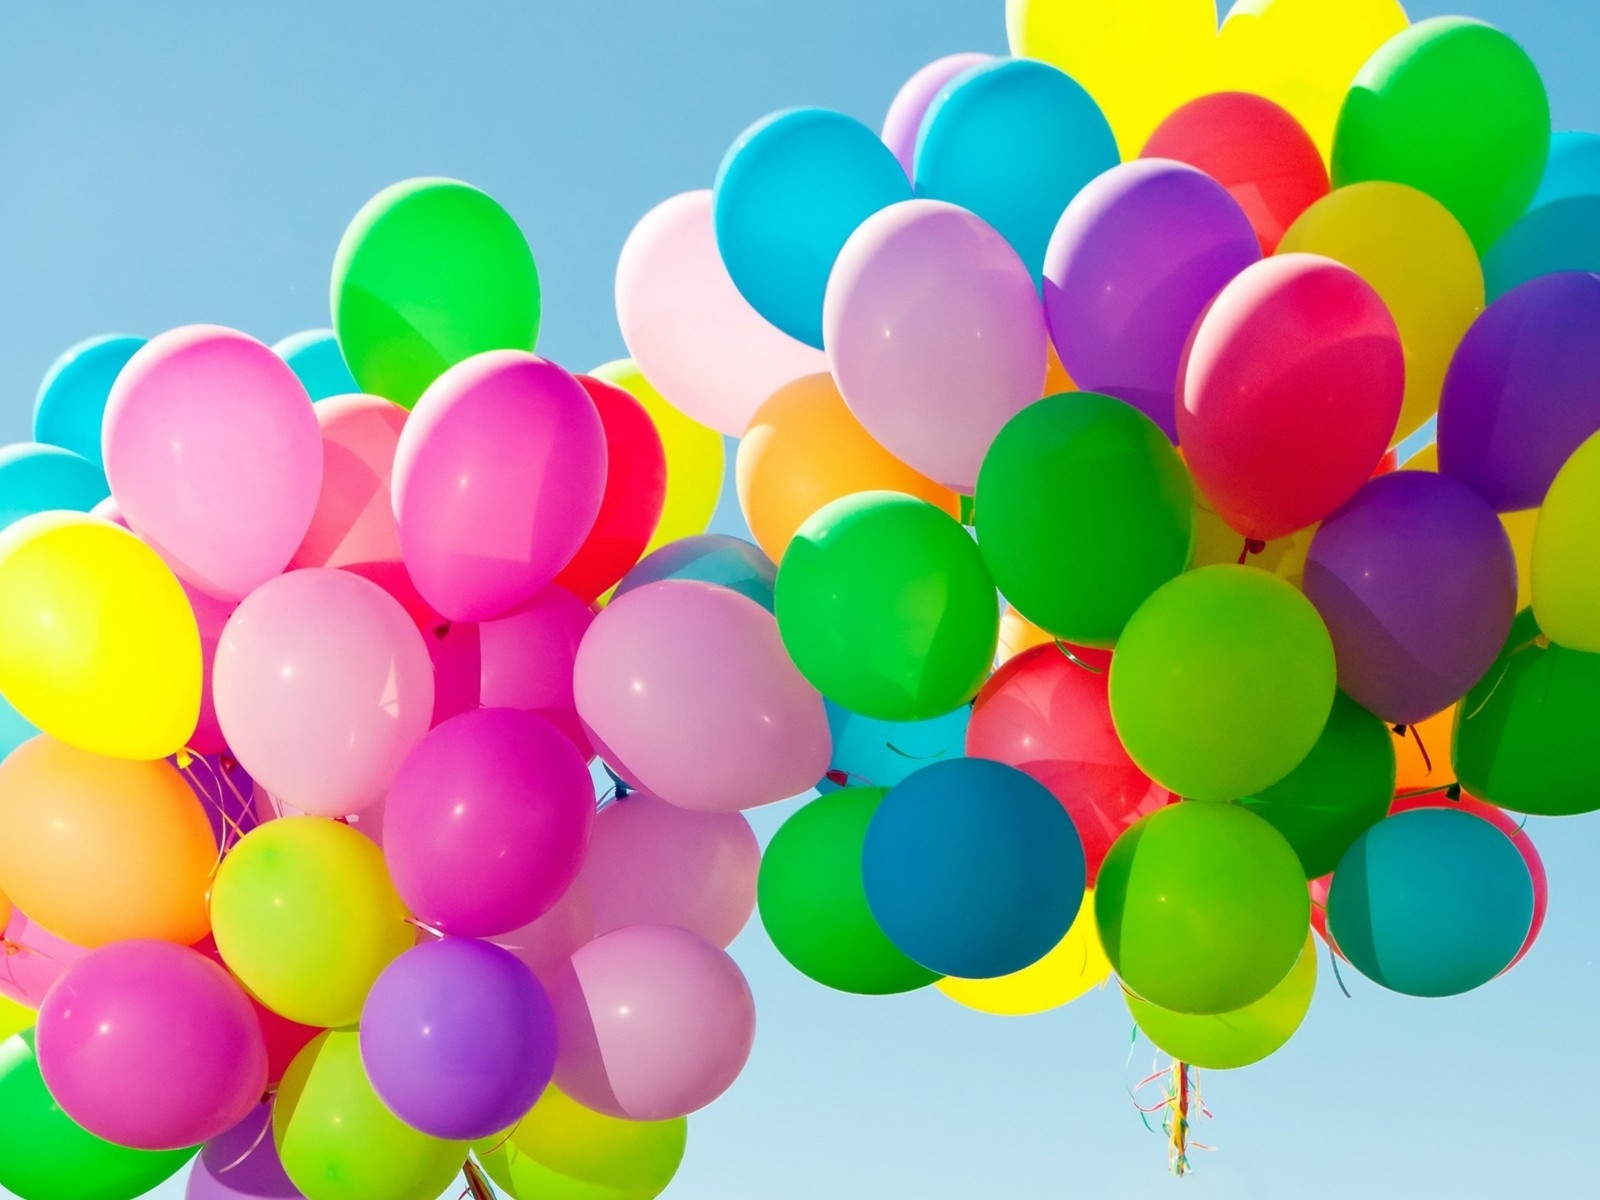 Colorful Balloons in the Sky for 1600 x 1200 resolution